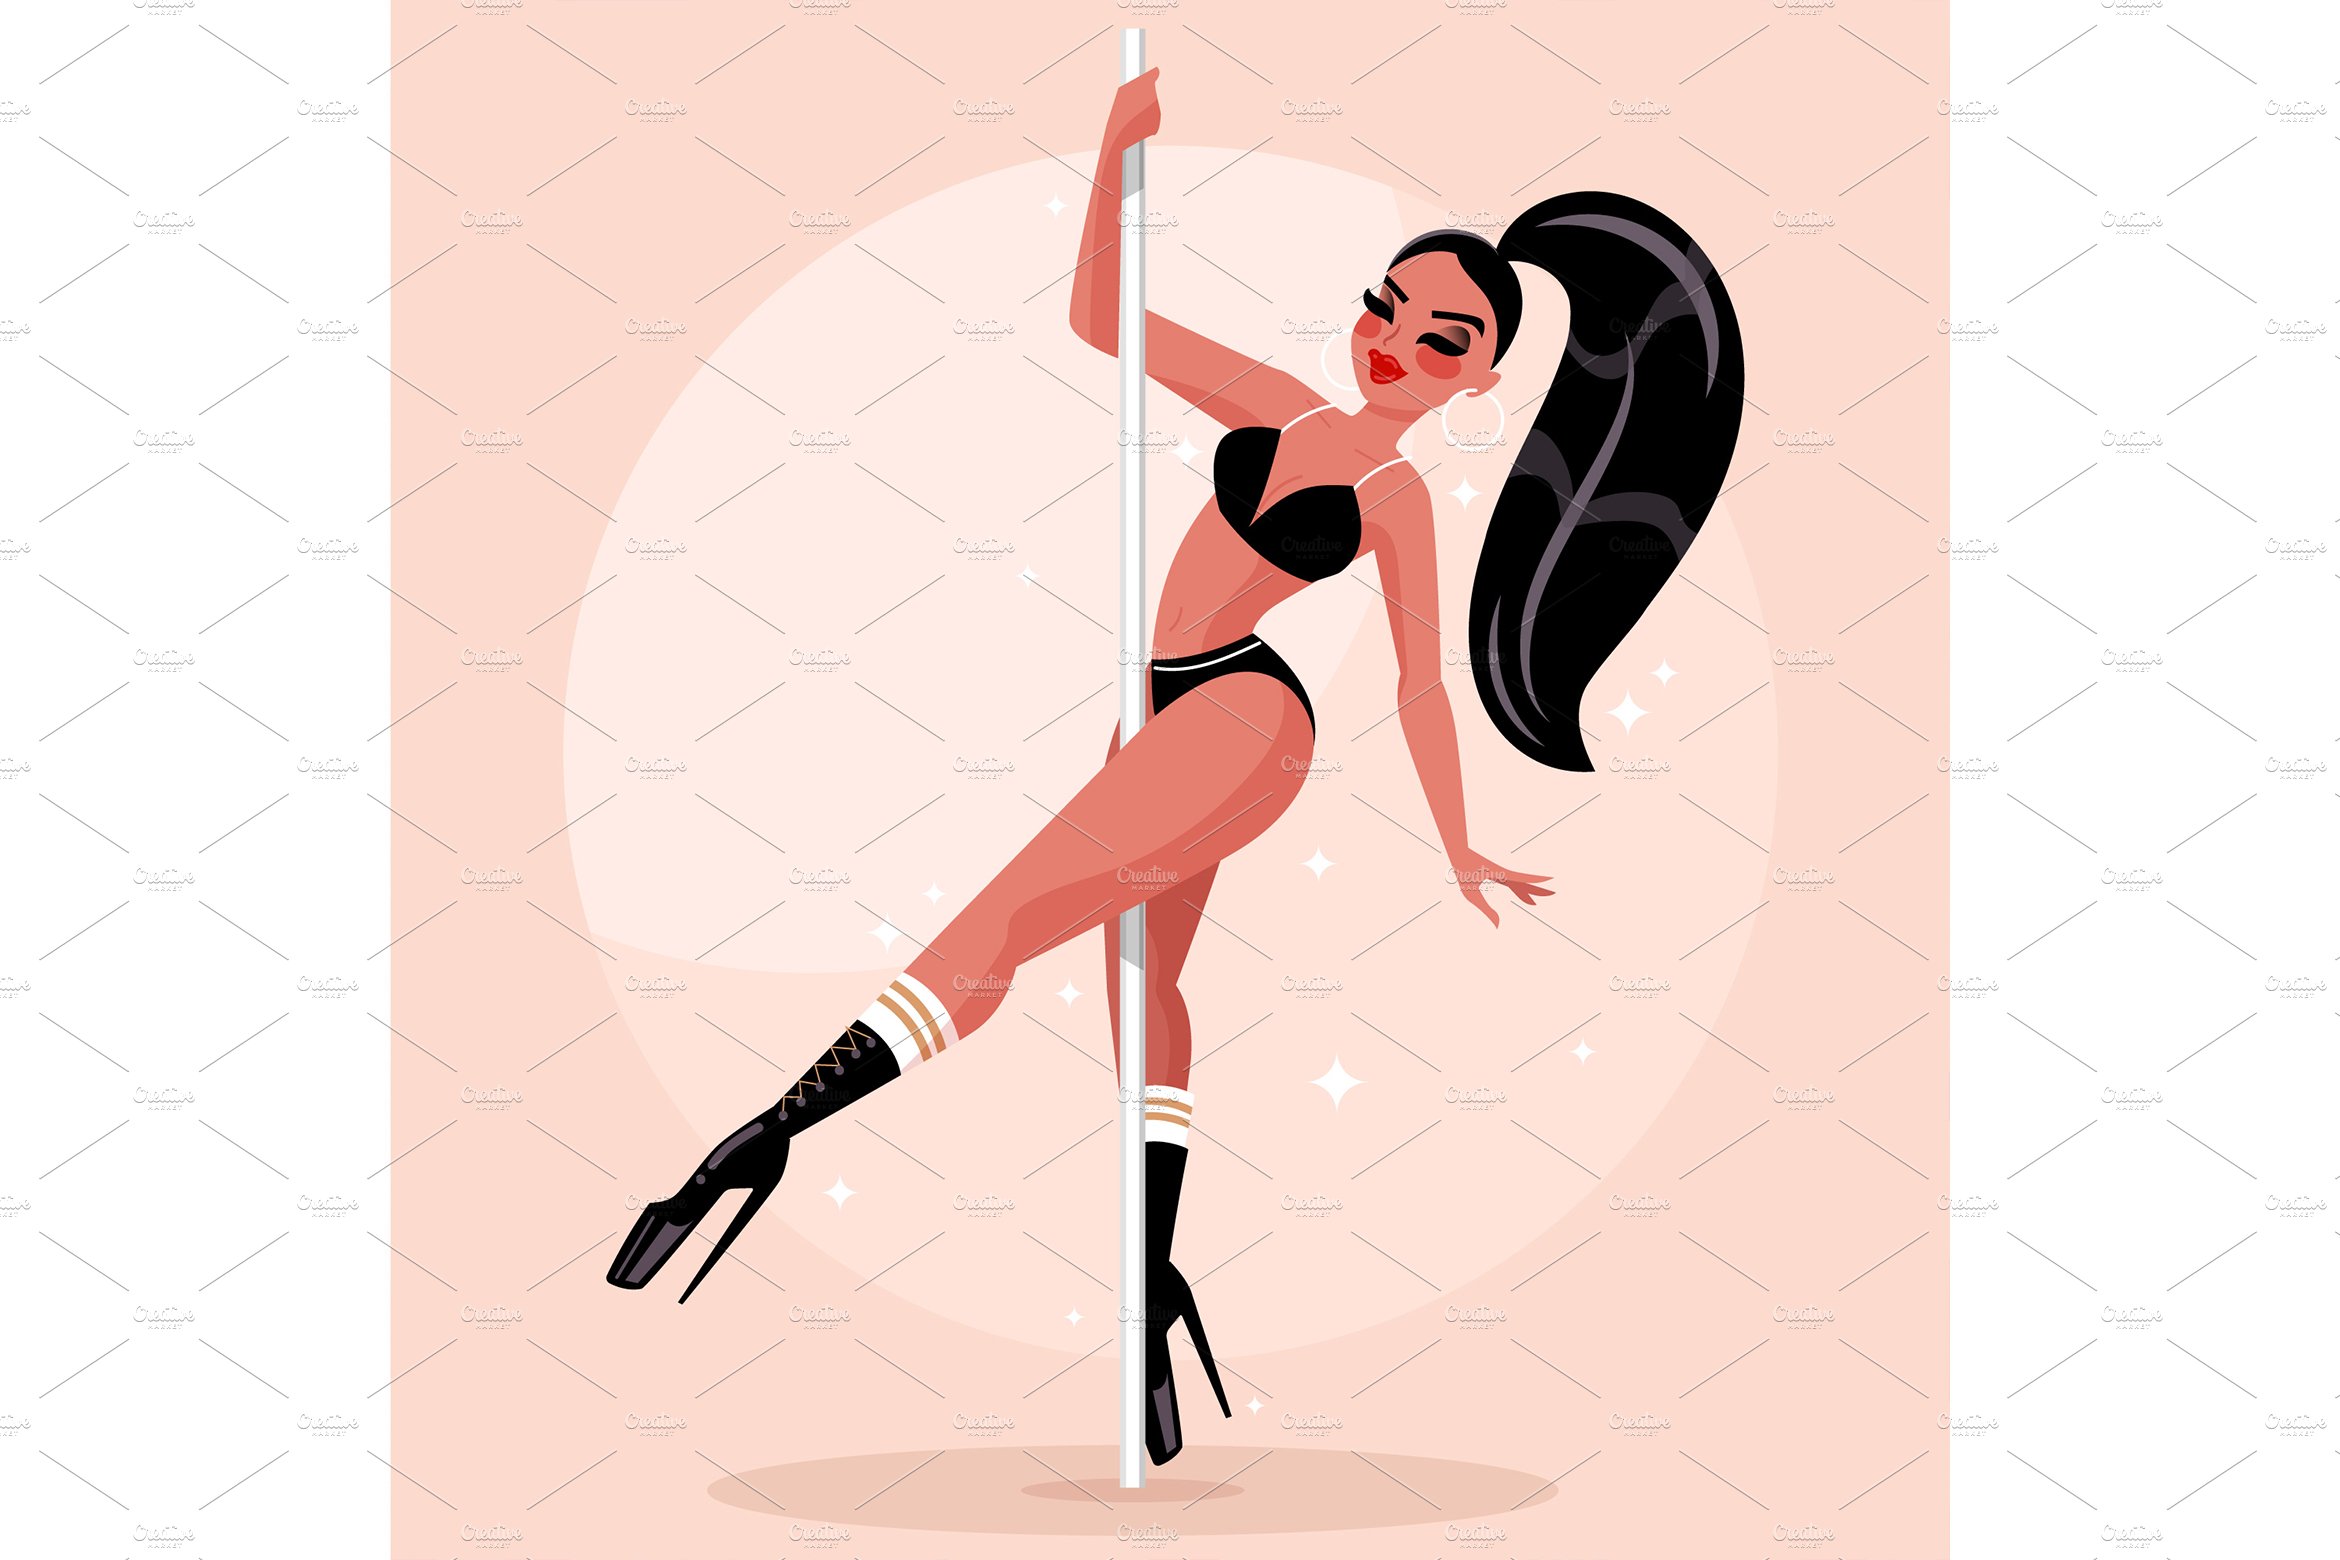 Sexy Pole Dancer cover image.